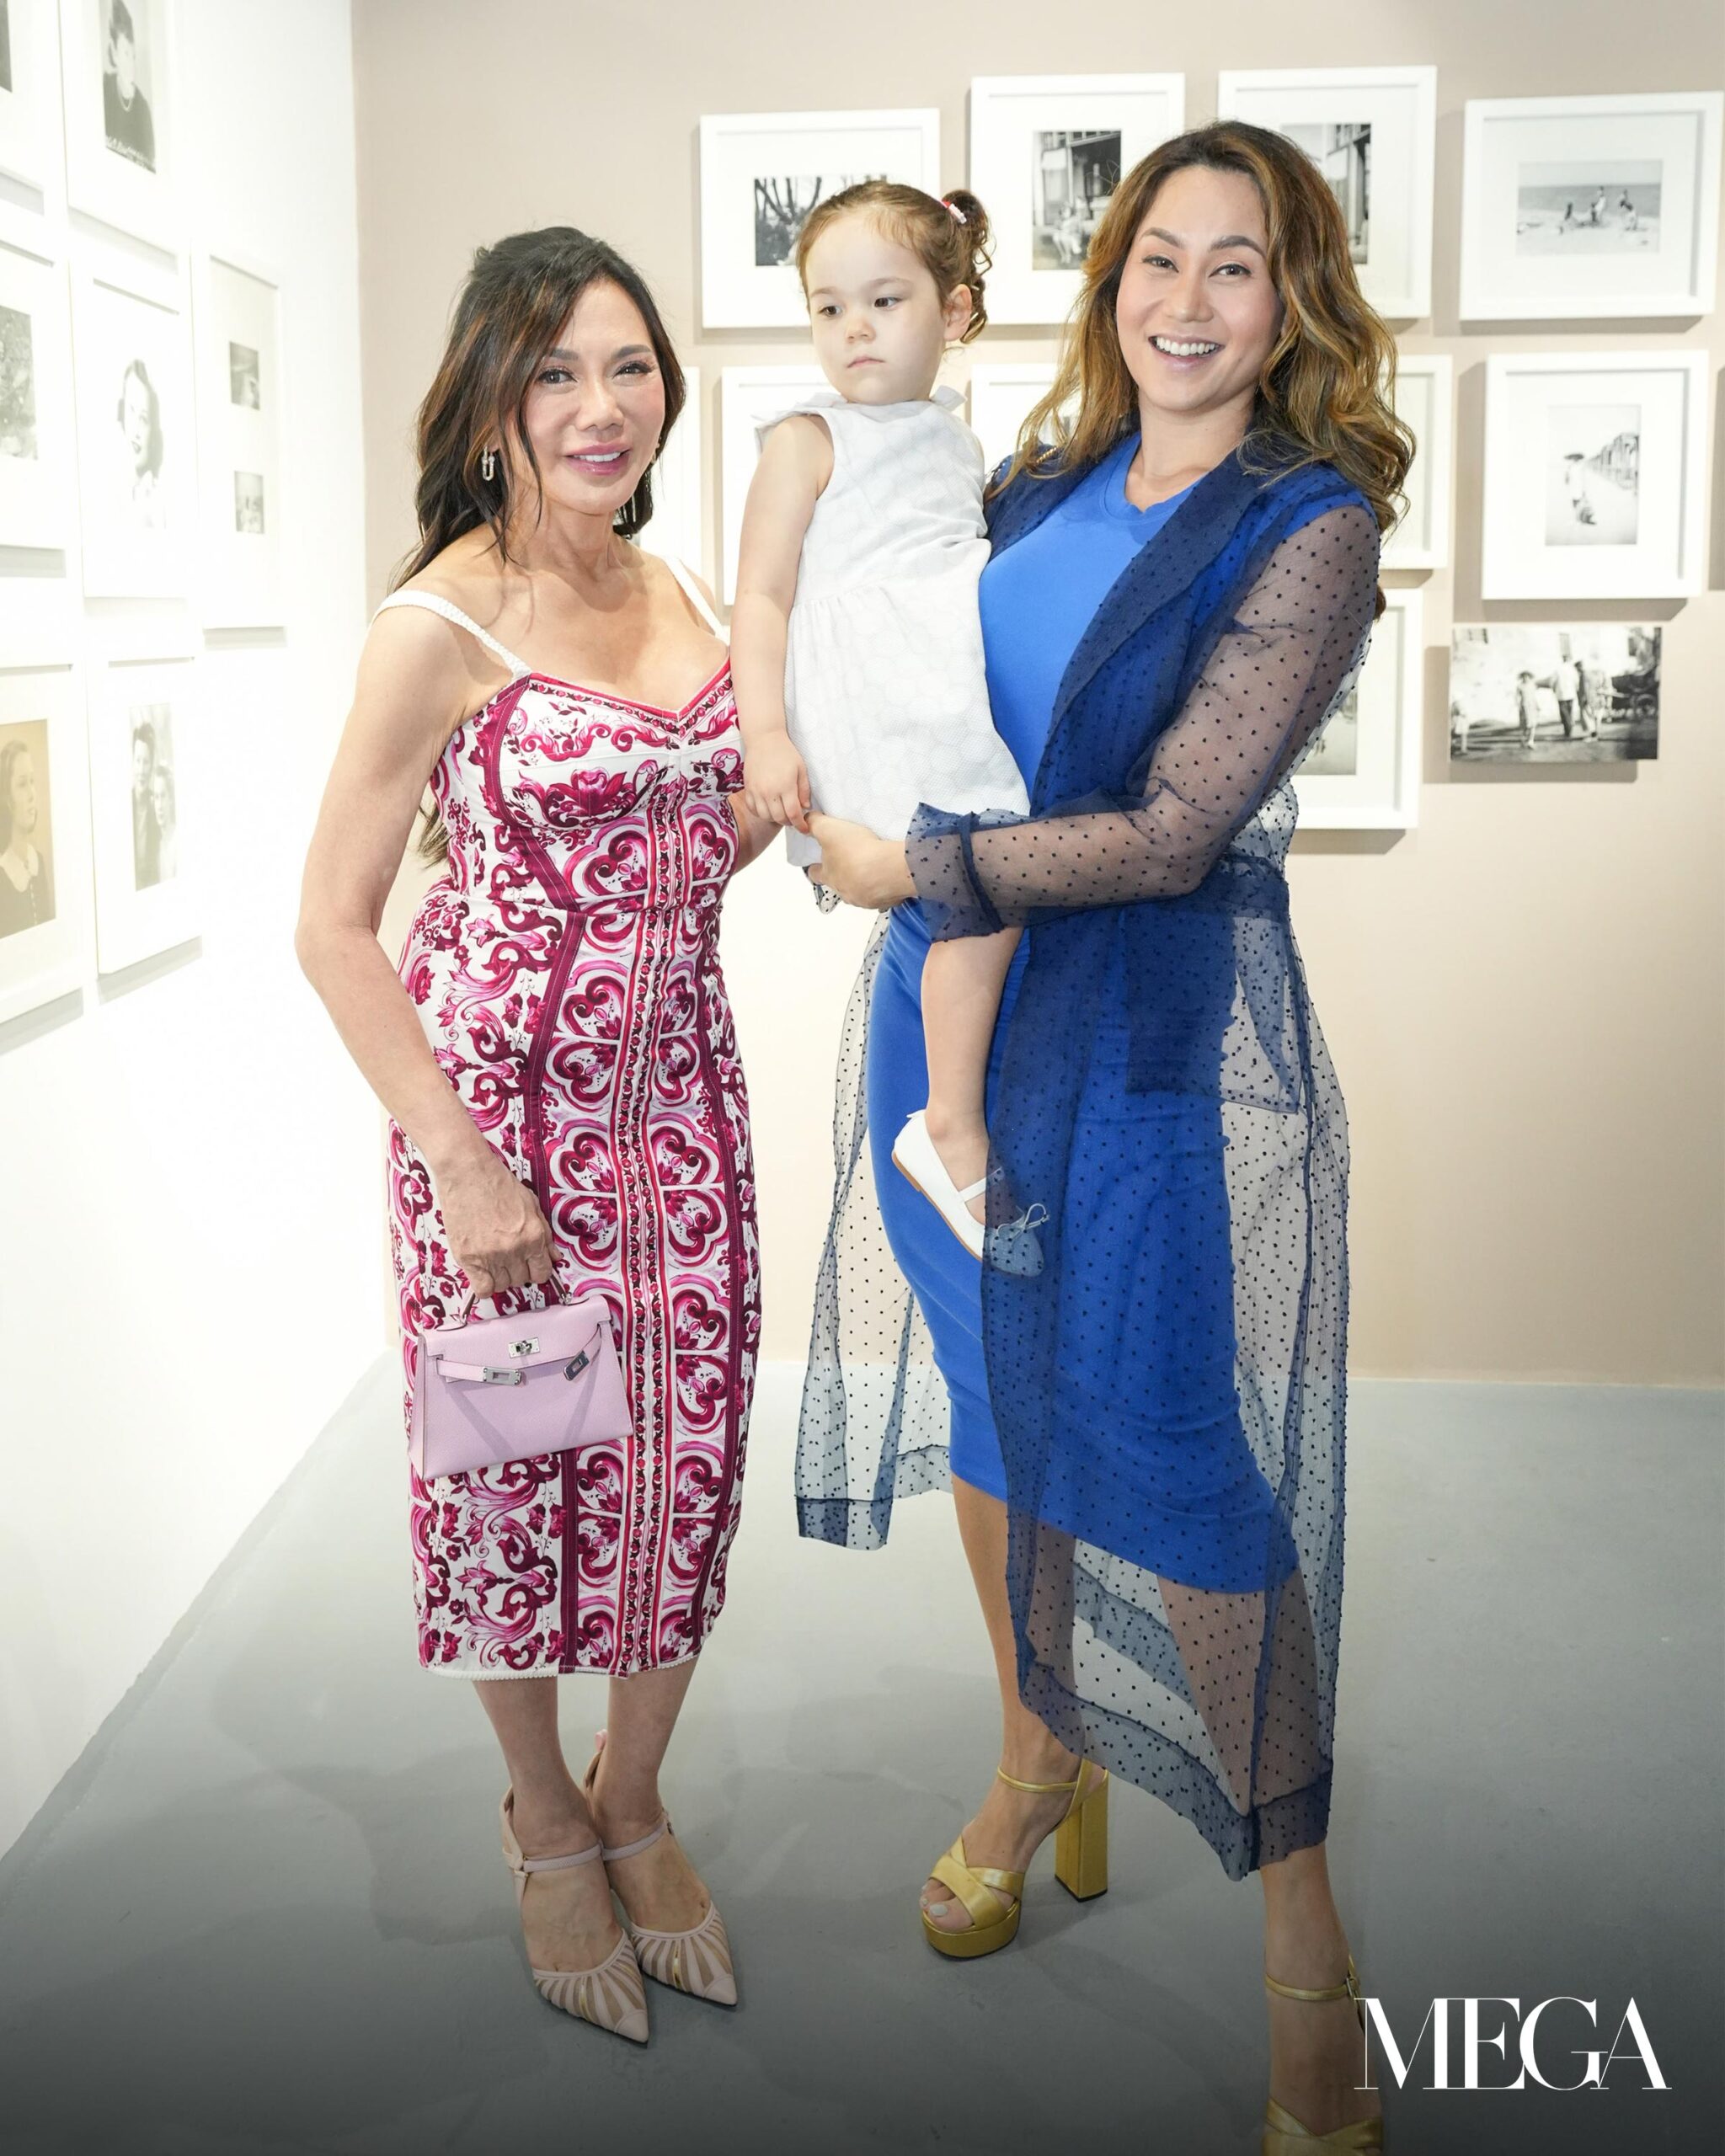 Dr. Vicki Belo with daughter Cristalle and granddaughter Siena